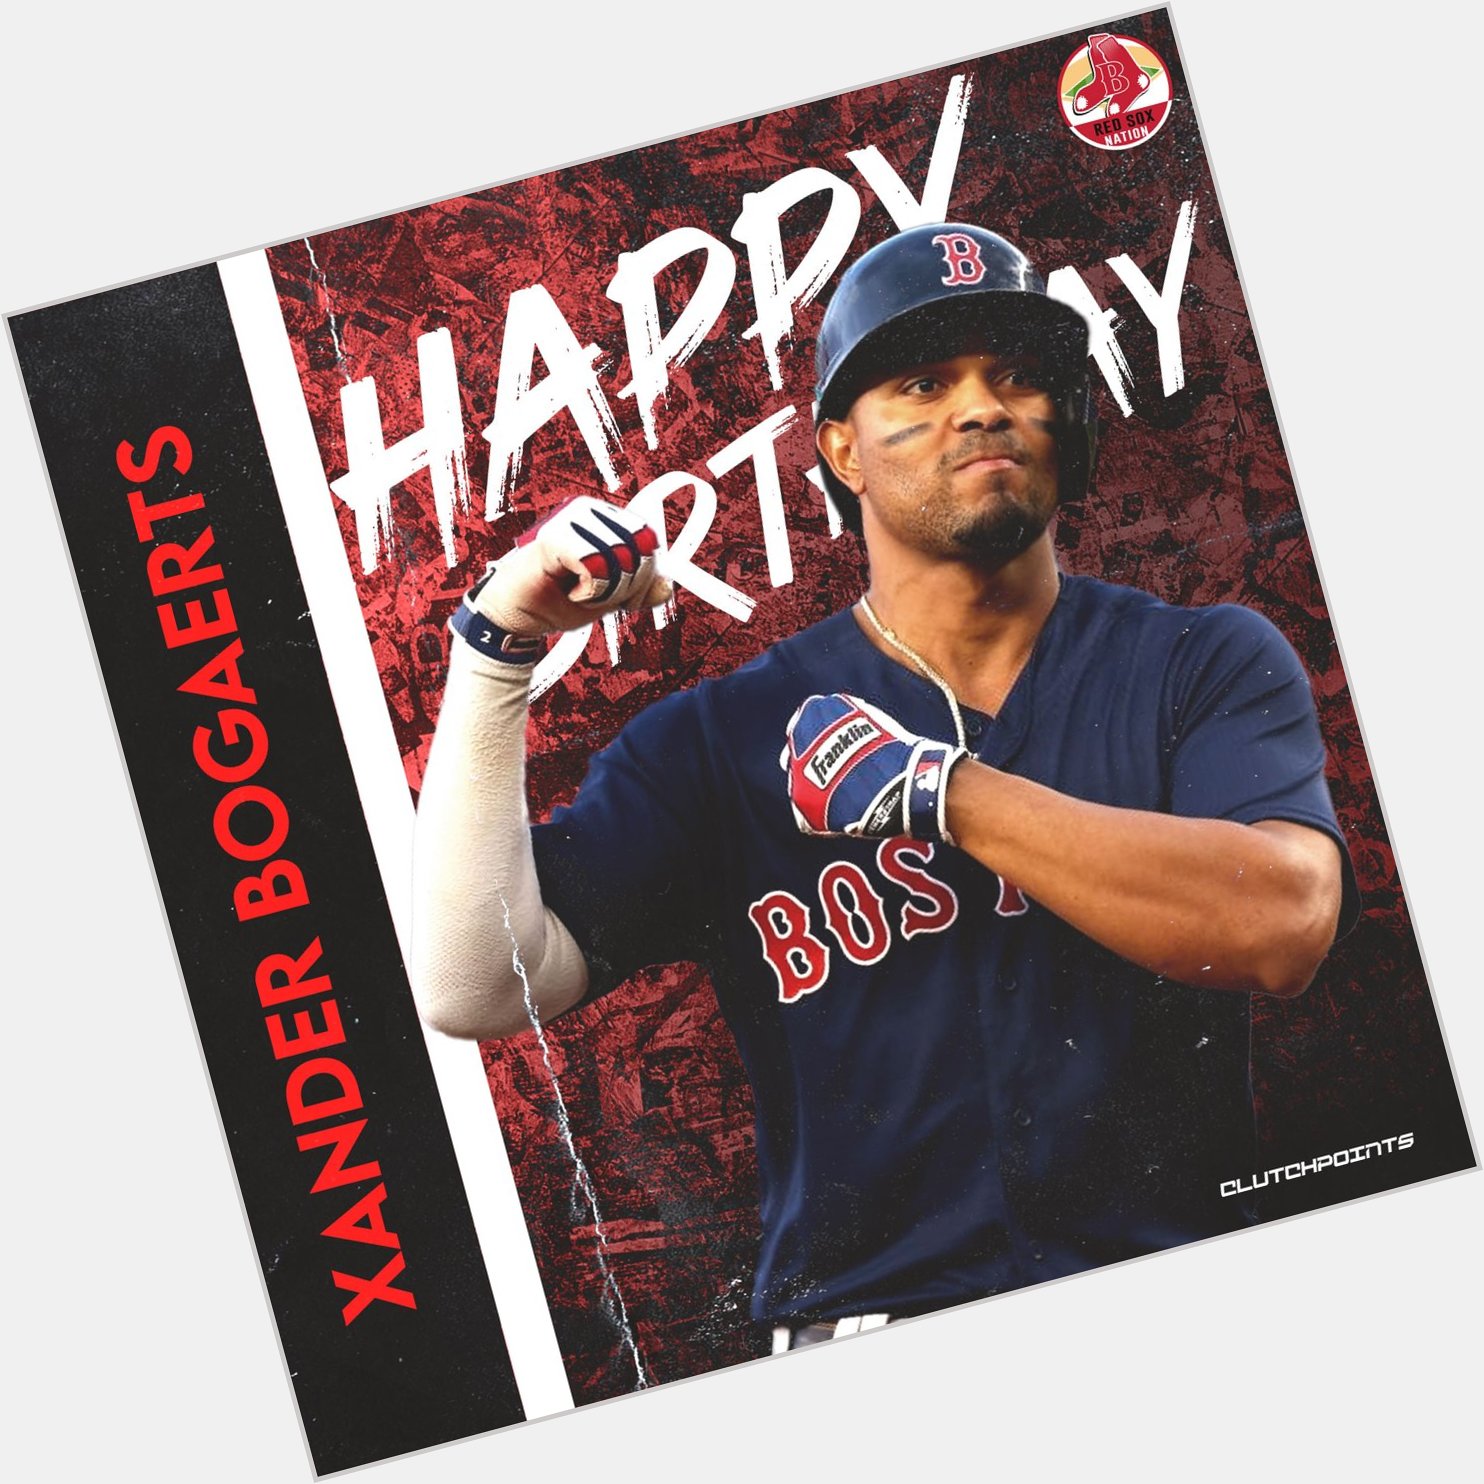 Red Sox Nation, join us in wishing Xander Bogaerts a happy 29th birthday 